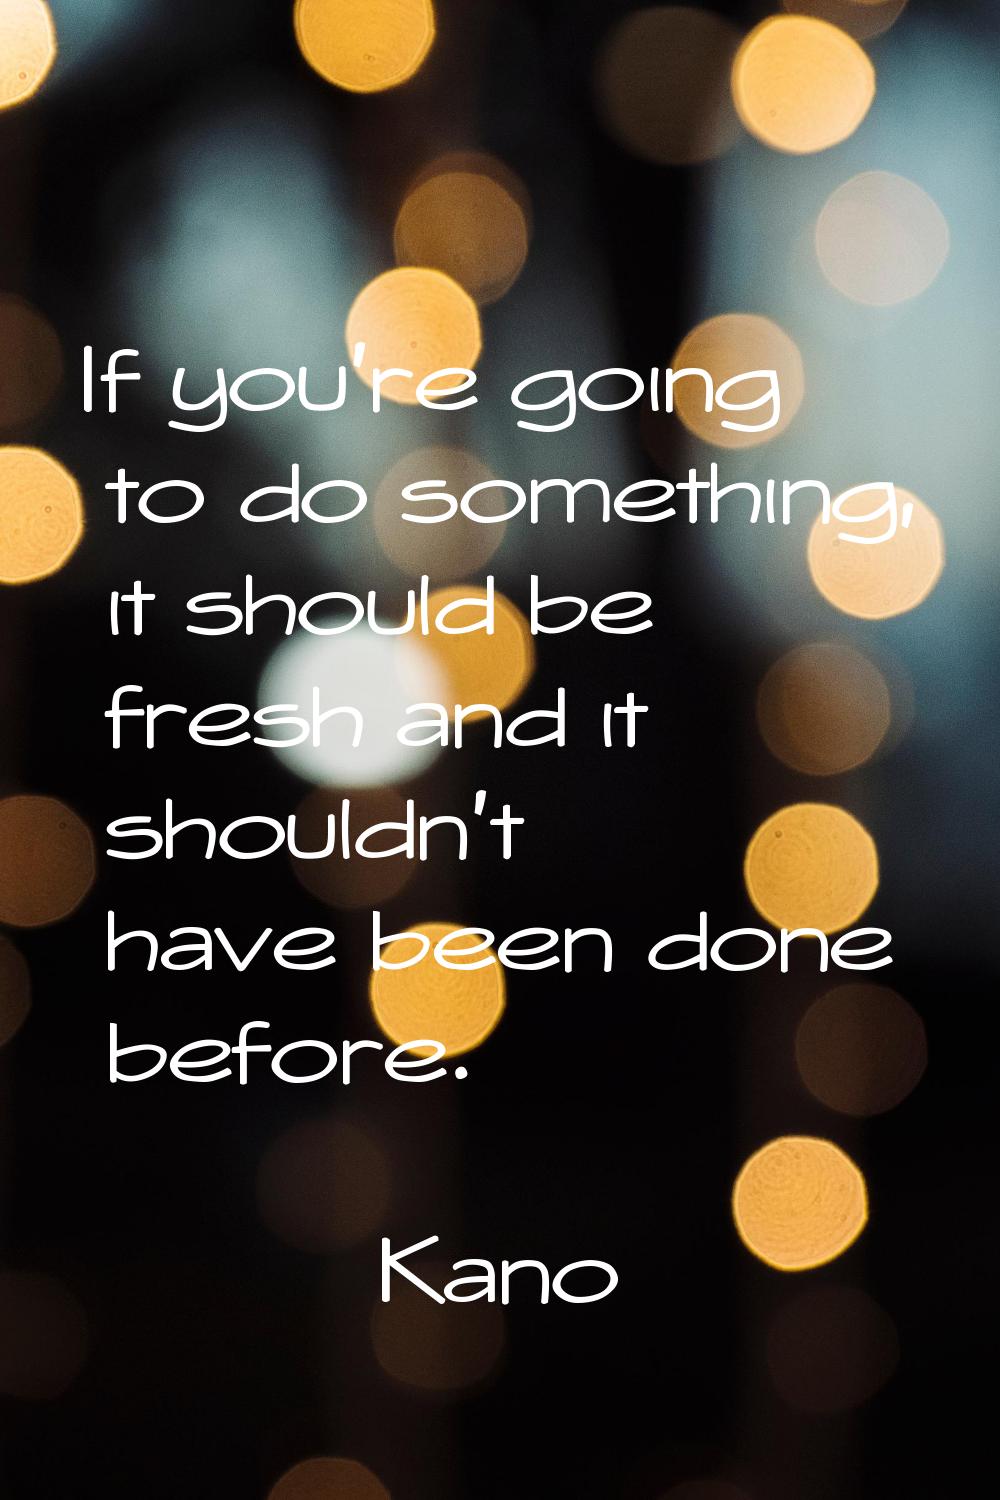 If you're going to do something, it should be fresh and it shouldn't have been done before.